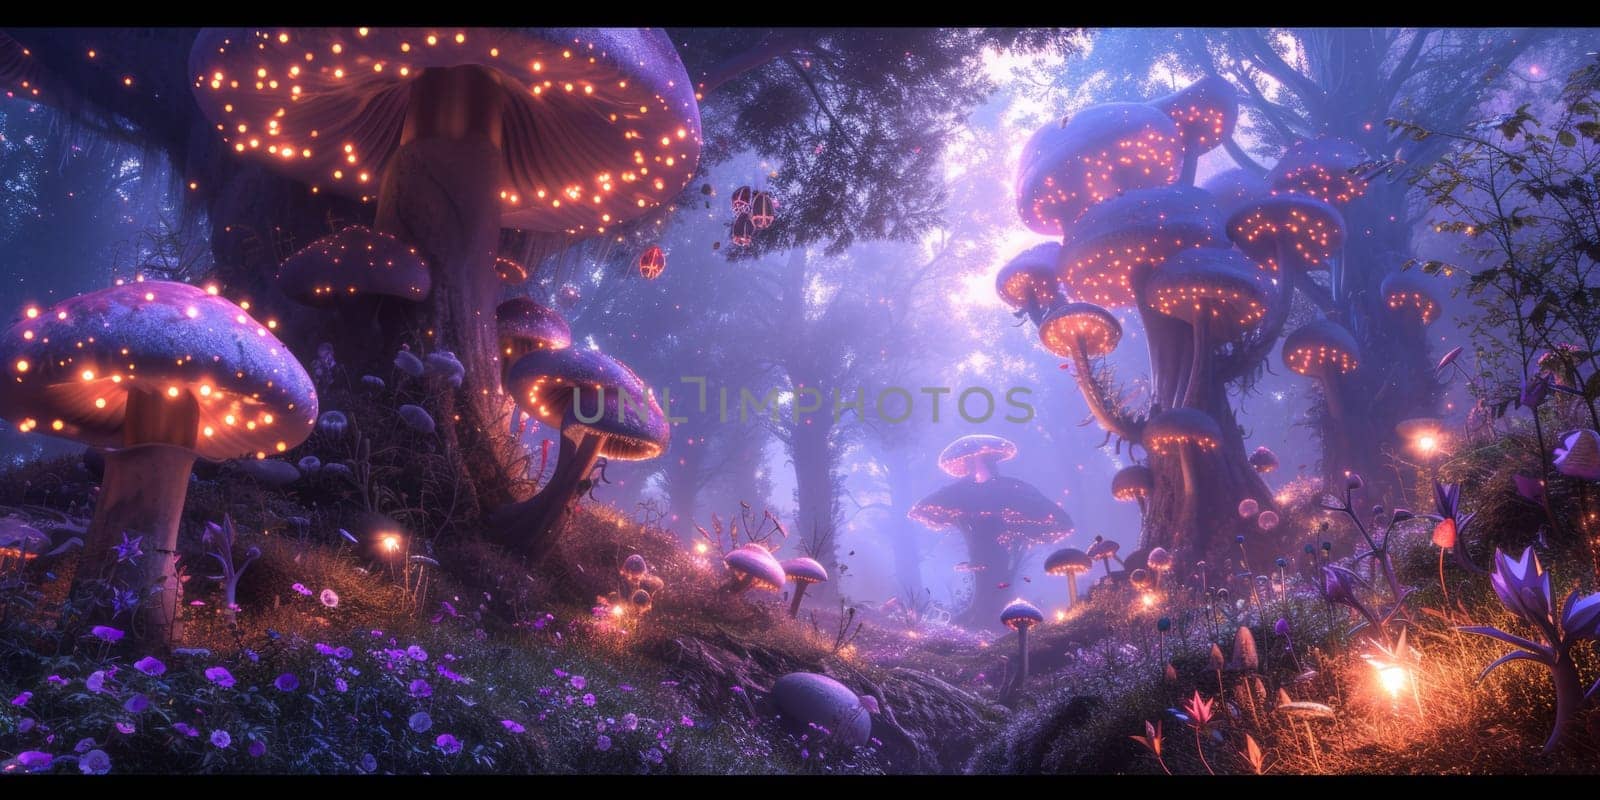 A forest filled with mushrooms and fairy lights in the night, AI by starush